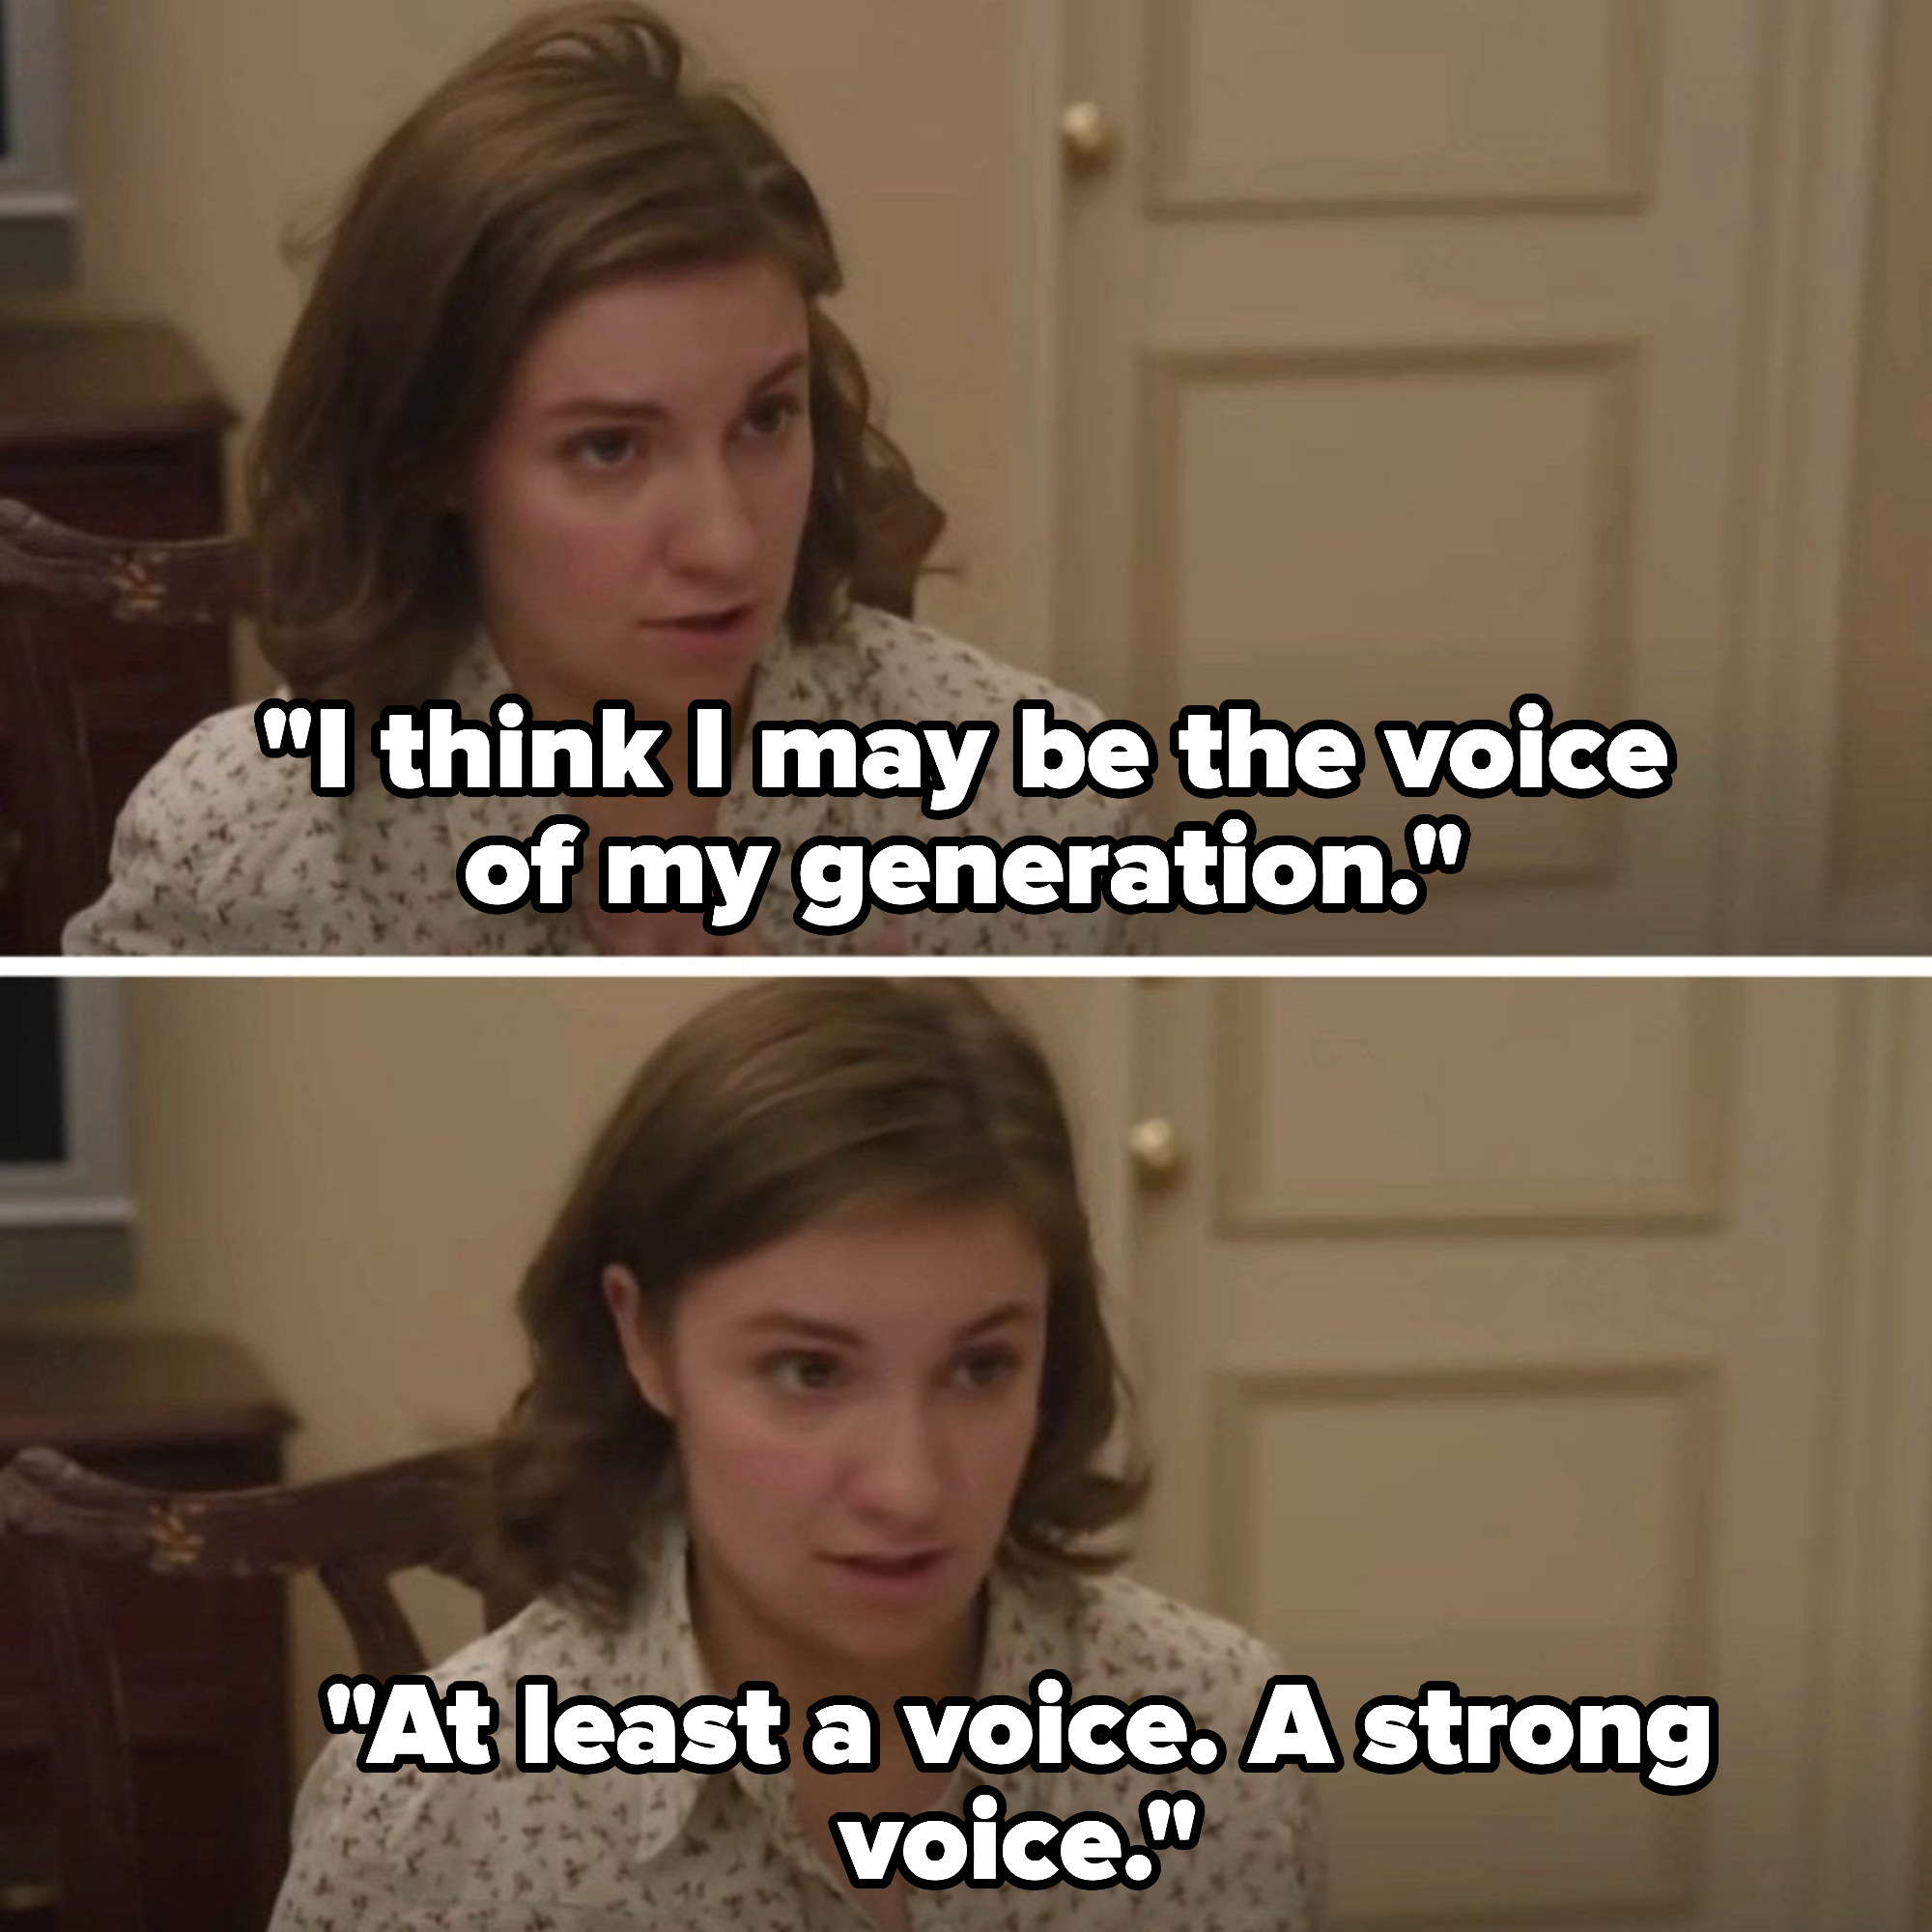 &quot;I think I may be the voice of my generation.&quot;